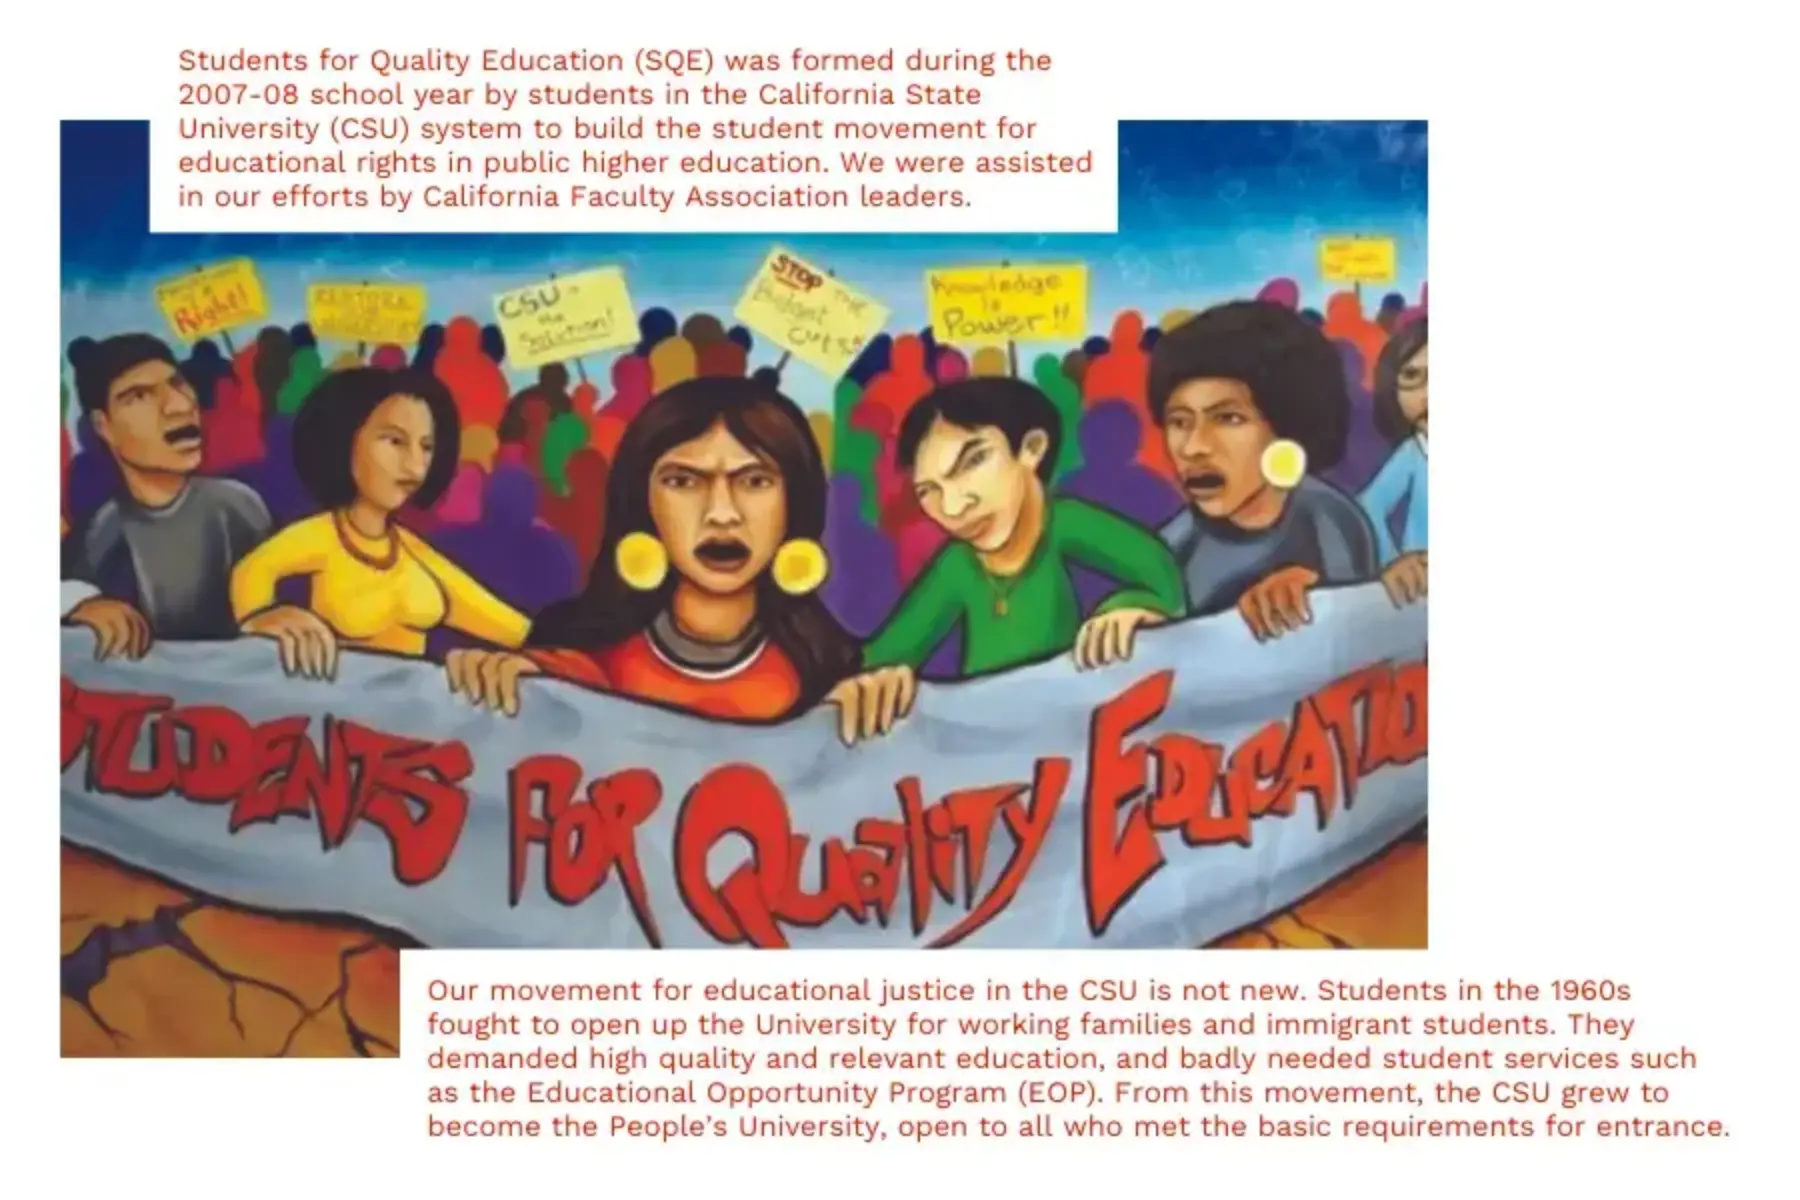 White background with large SQE mural. The mural has blue sky on the top and orange-brown earth on the bottom. Between them is a group of students composed of different races and colors holding signs. Five students toward the front are holding a white banner with red text that reads students for quality education. Two white boxes with red text hover over the mural. The one toward the top reads Students for Quality Education (SQE) was formed during the 2007-08 school year by students in the California State University (CSU) system to build the student movement for educational rights in public higher education. We were assisted in our efforts by California Faculty Association leaders. The one toward the bottom reads Our movement for educational justice in the CSU is not new. Students in the 1960s fought to open up the University for working families and immigrant students. They demanded high quality and relevant education, and badly needed student services such as the Educational Opportunity Program (EOP). From this movement, the CSU grew to become the People’s University, open to all who met the basic requirements for entrance.